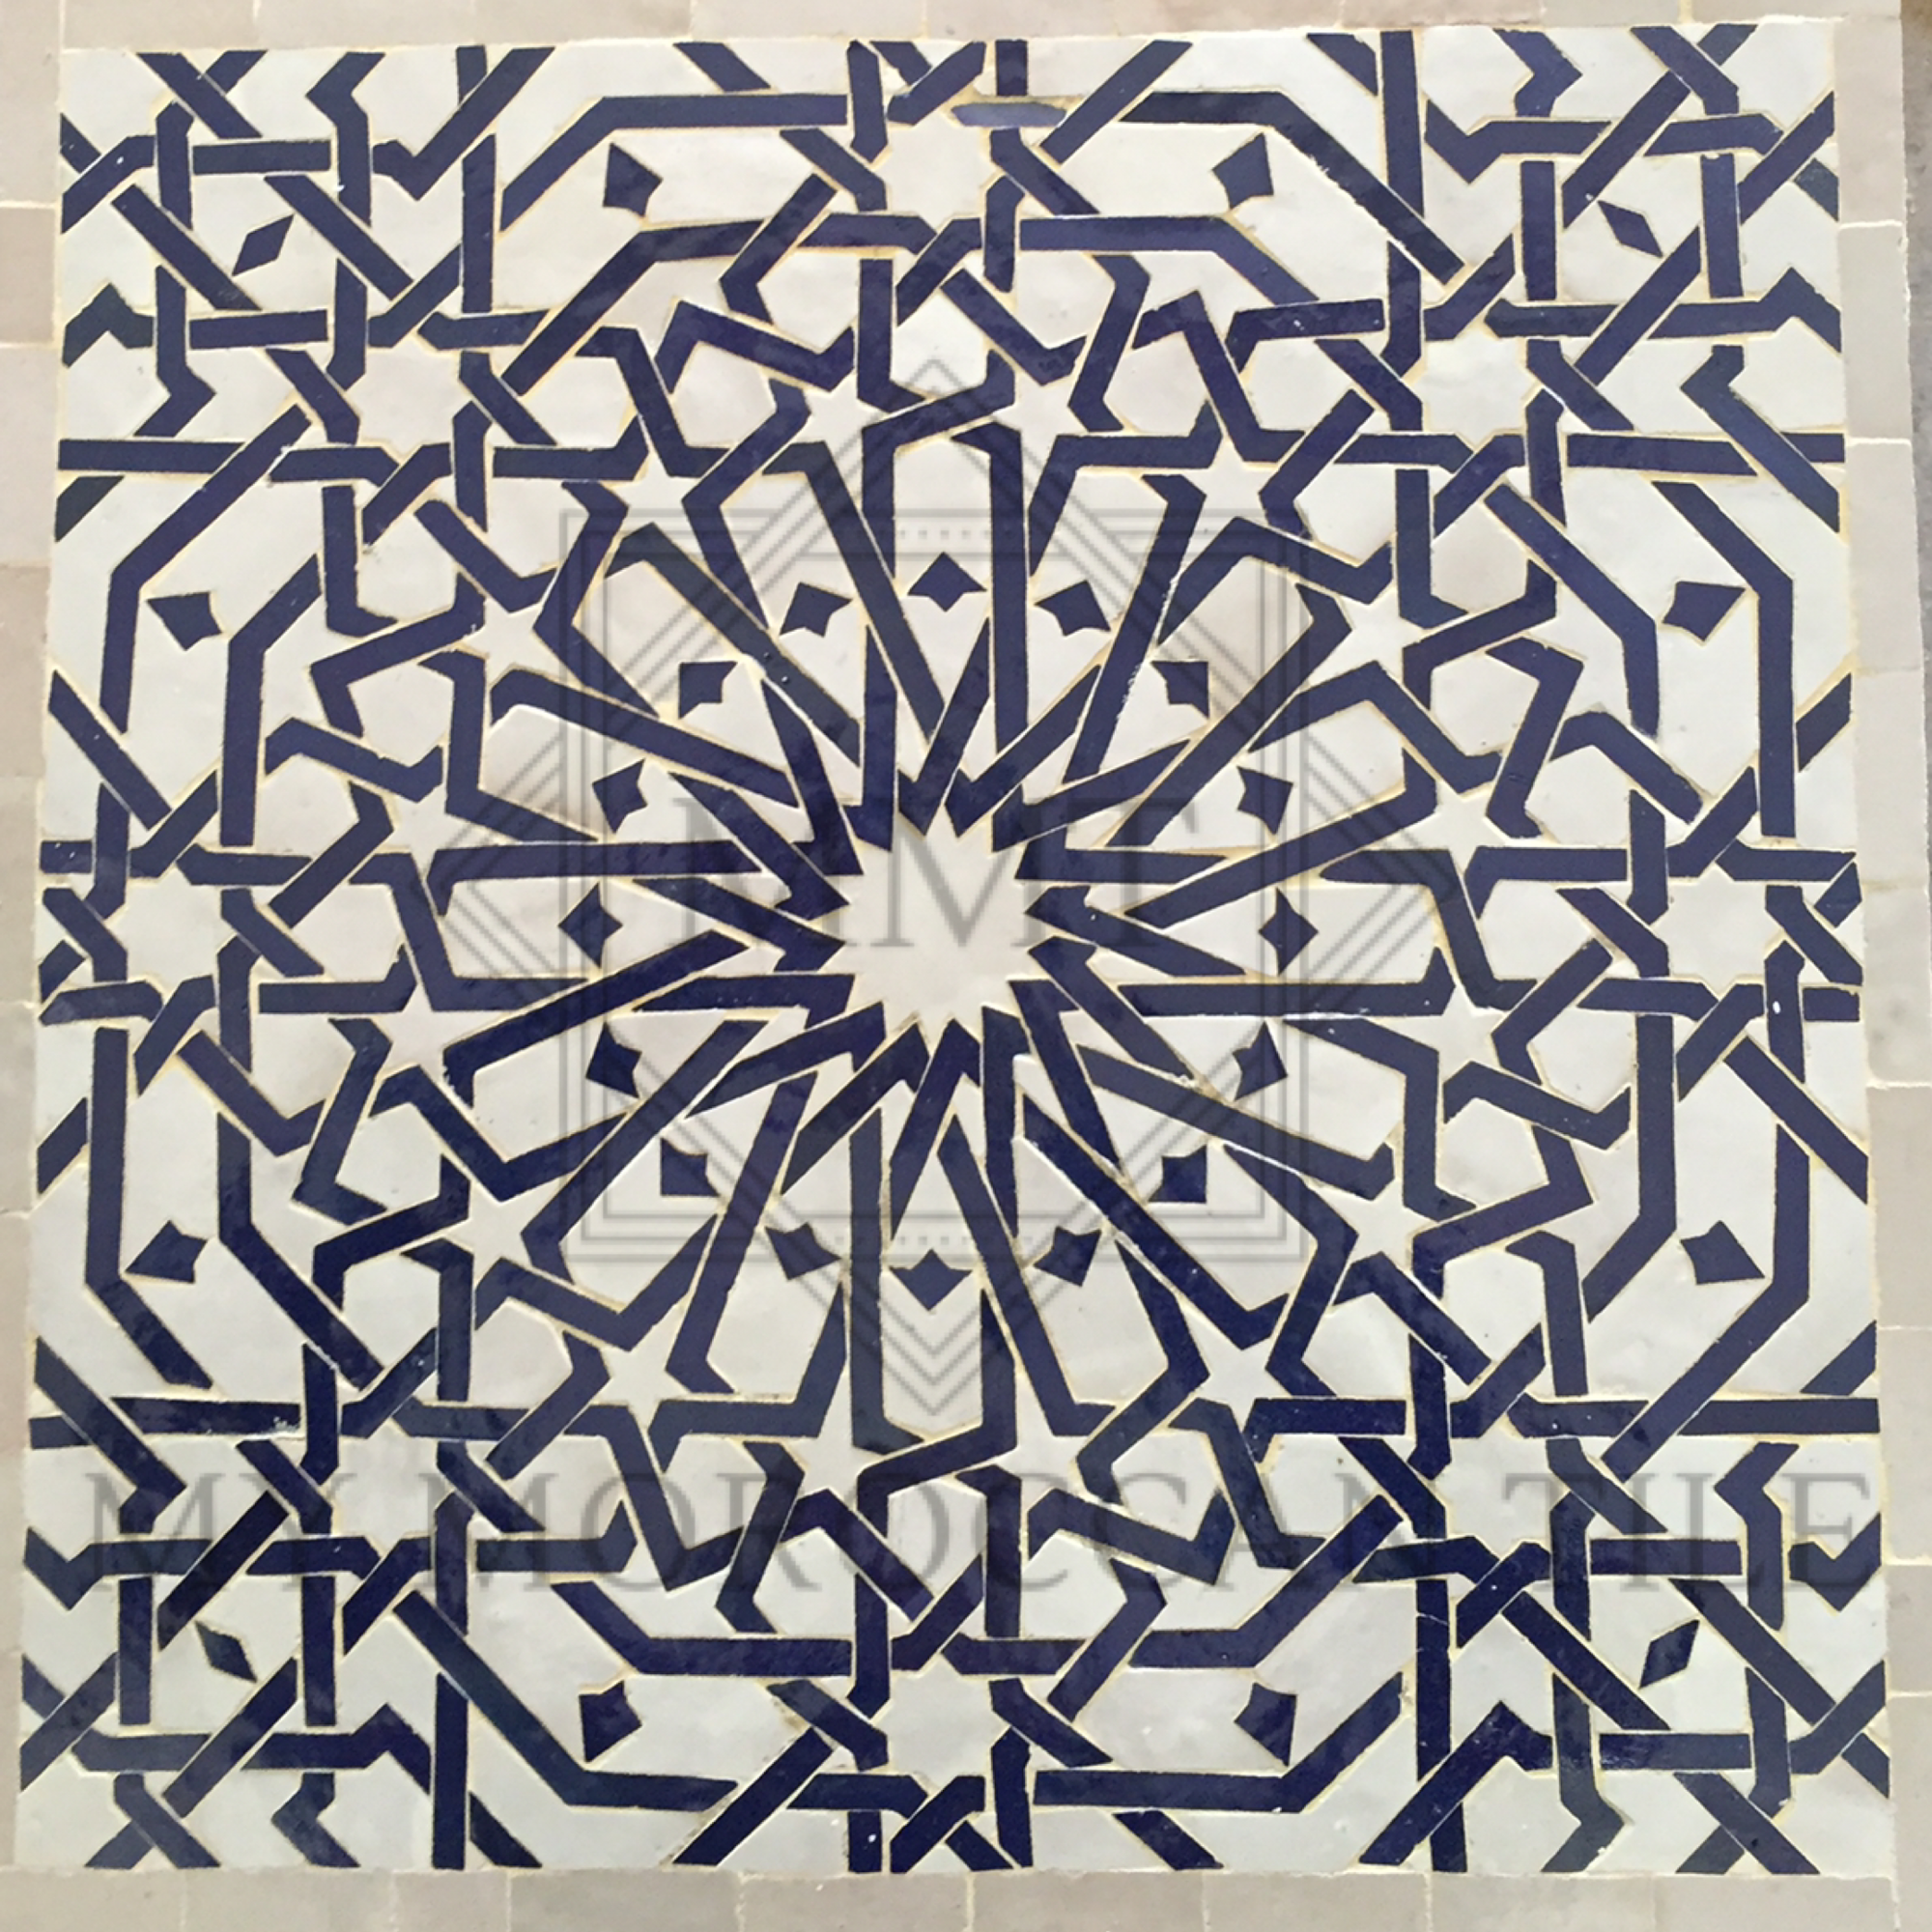 Alhambra sixteen pointed star Mosaic Tile